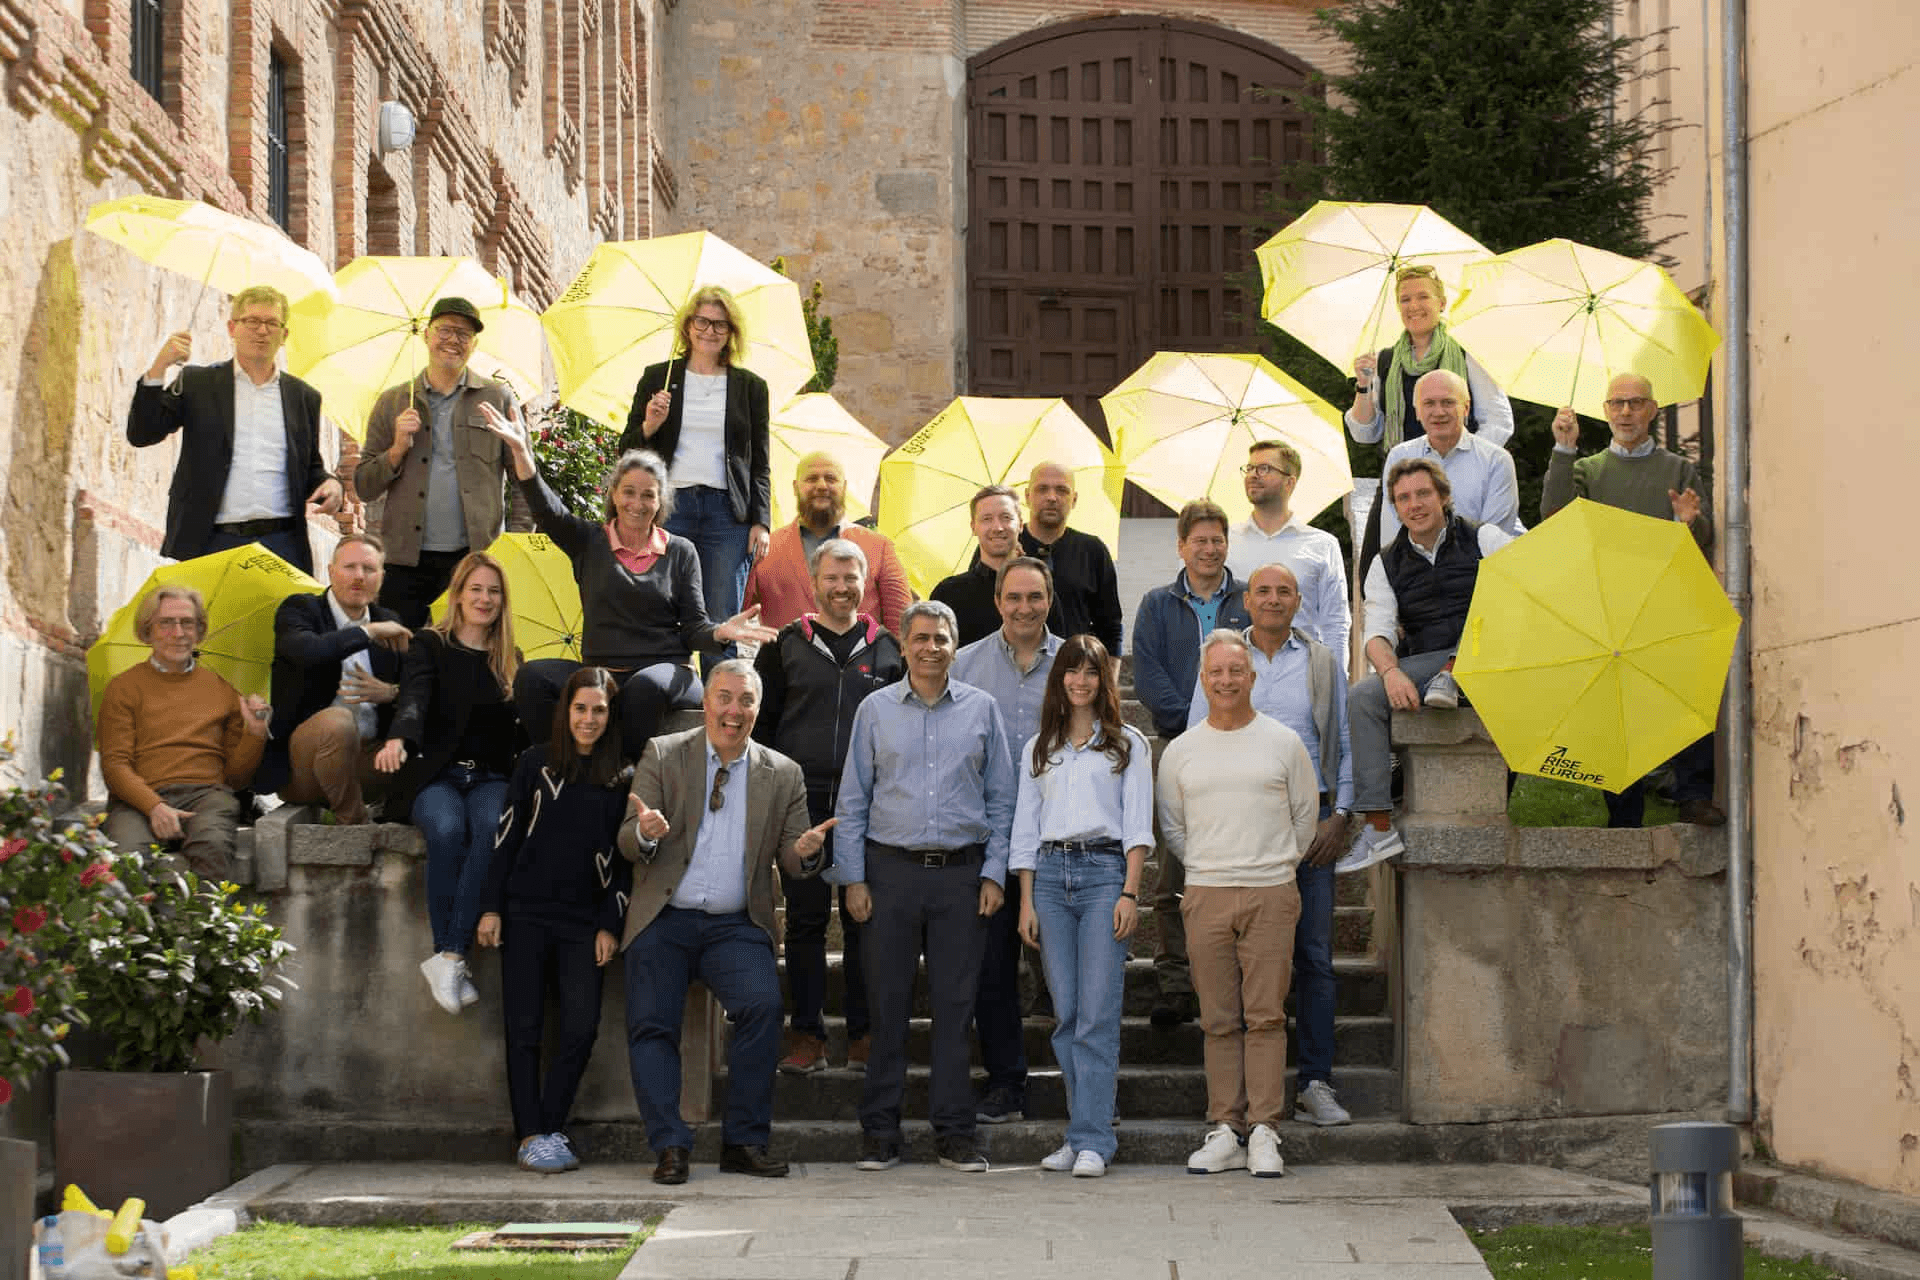 A group of people holding yellow umbrellas posing on steps outdoors.